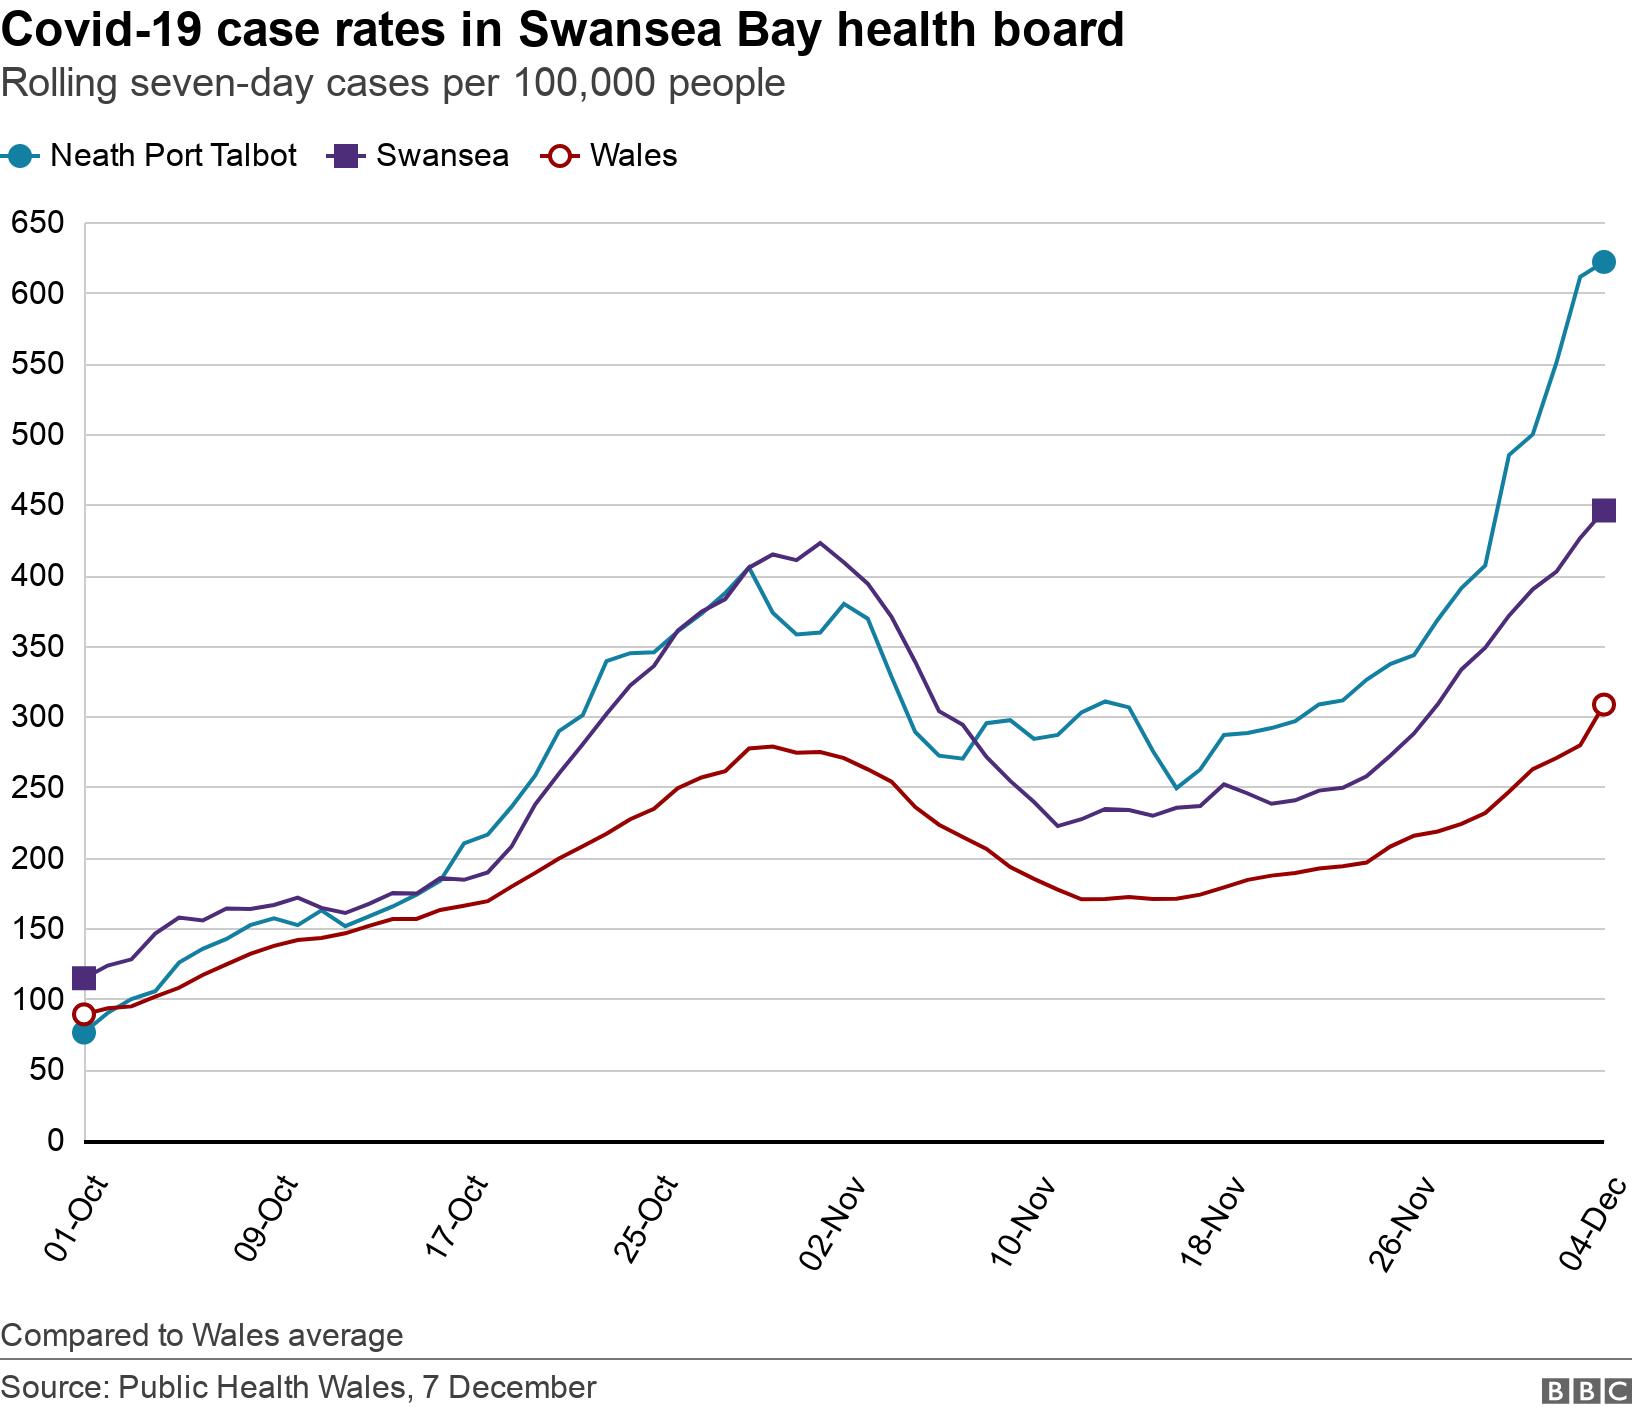 Covid-19 case rates in Swansea Bay health board . Rolling seven-day cases per 100,000 people.  Compared to Wales average.